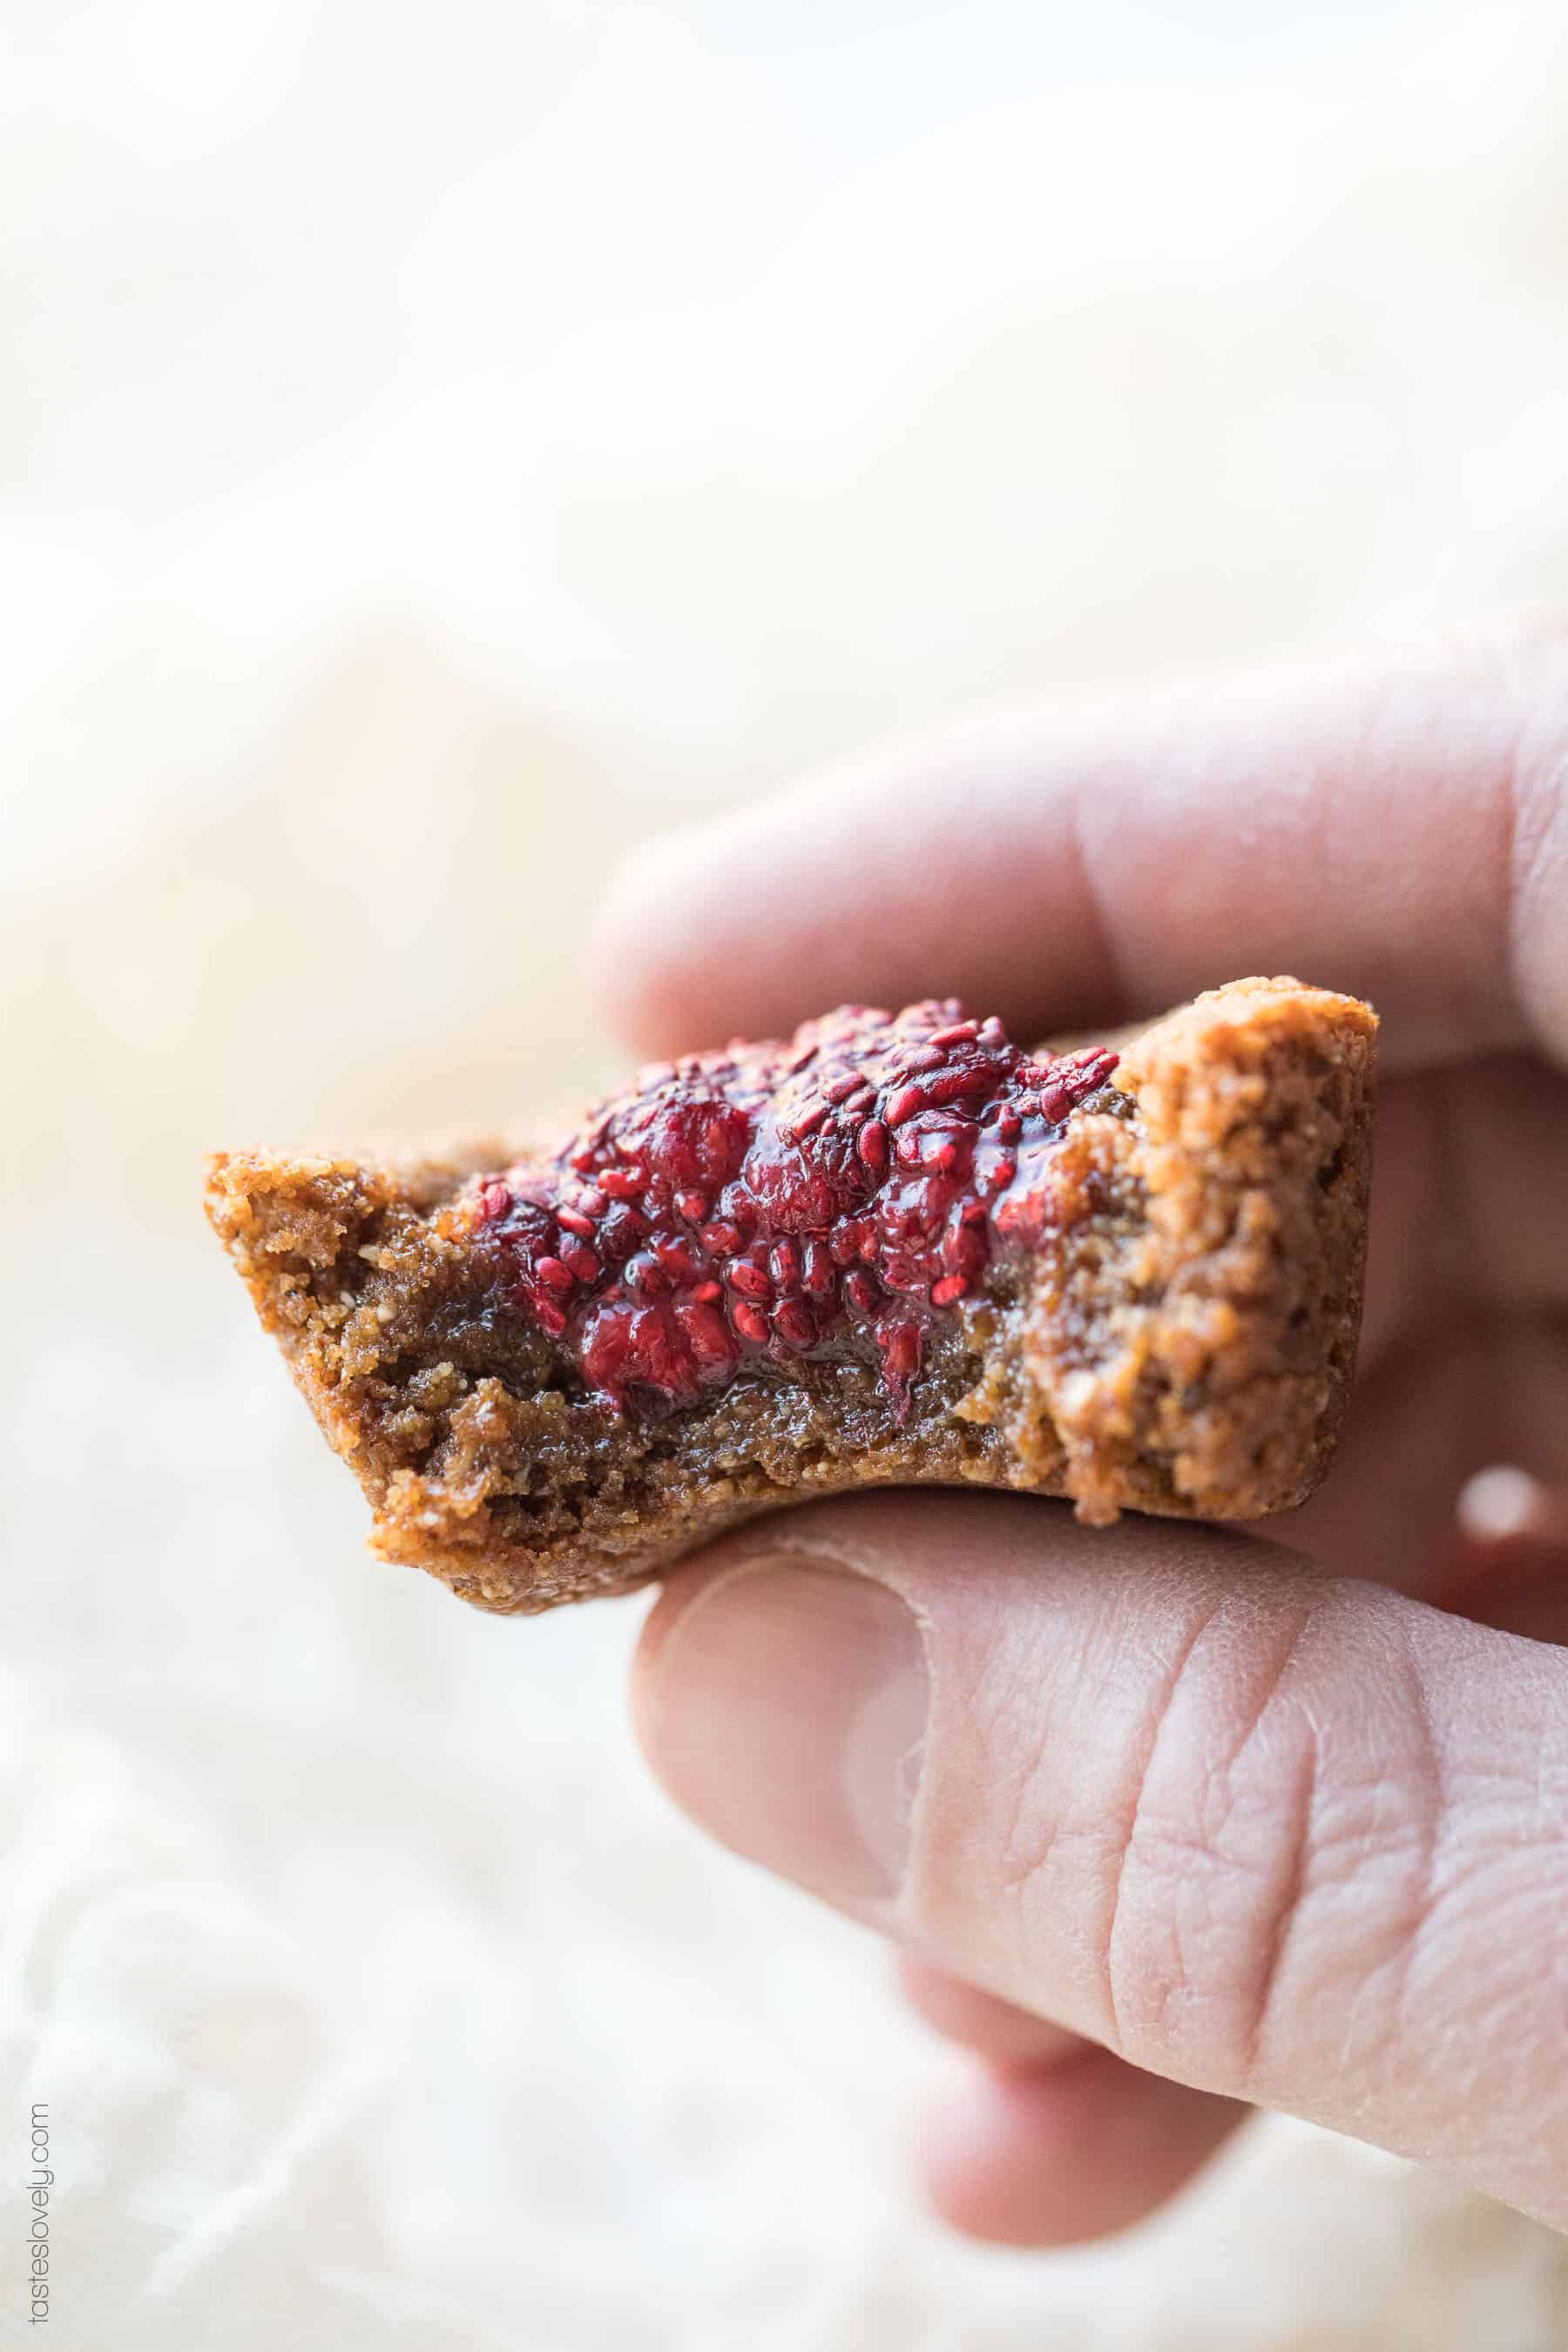 Paleo Almond Butter and Chia Jam Cookie Cups - a gluten free, dairy free and refined sugar free cookie recipe